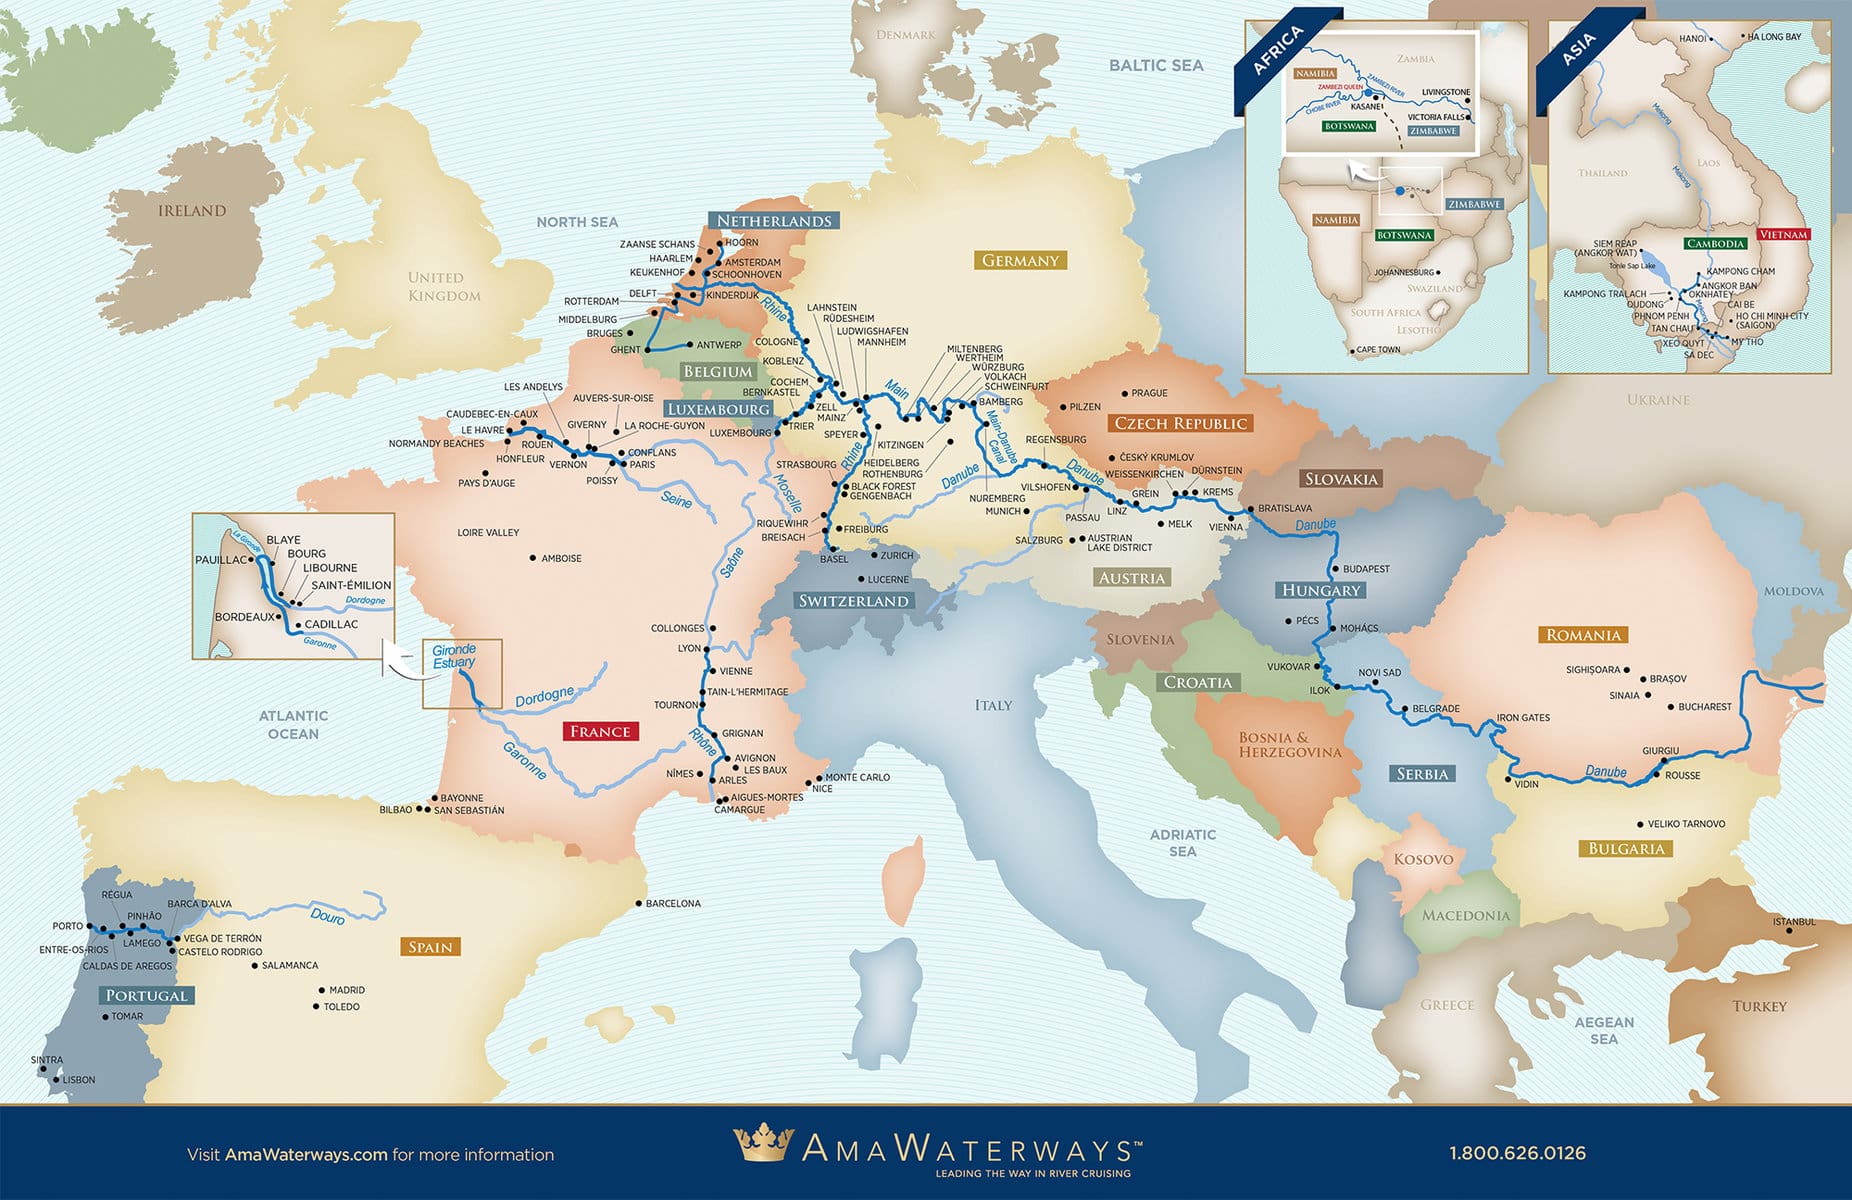 Amawaterways maps can help you decide on your rivercruise with your amawaterways travel agents help